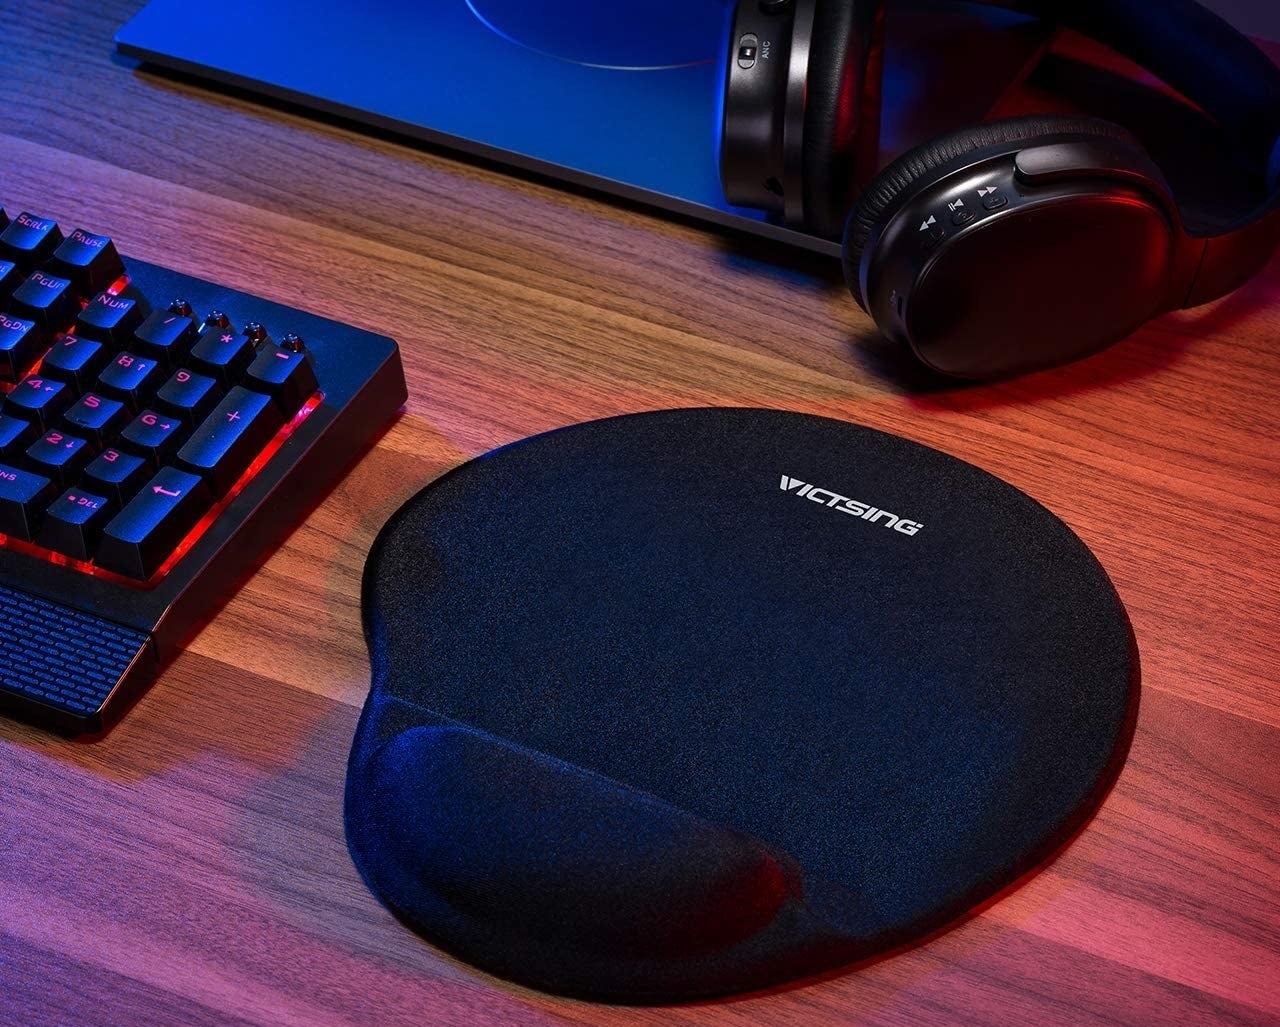 A mousepad with a wrist support on a desk beside headphones and a keyboard